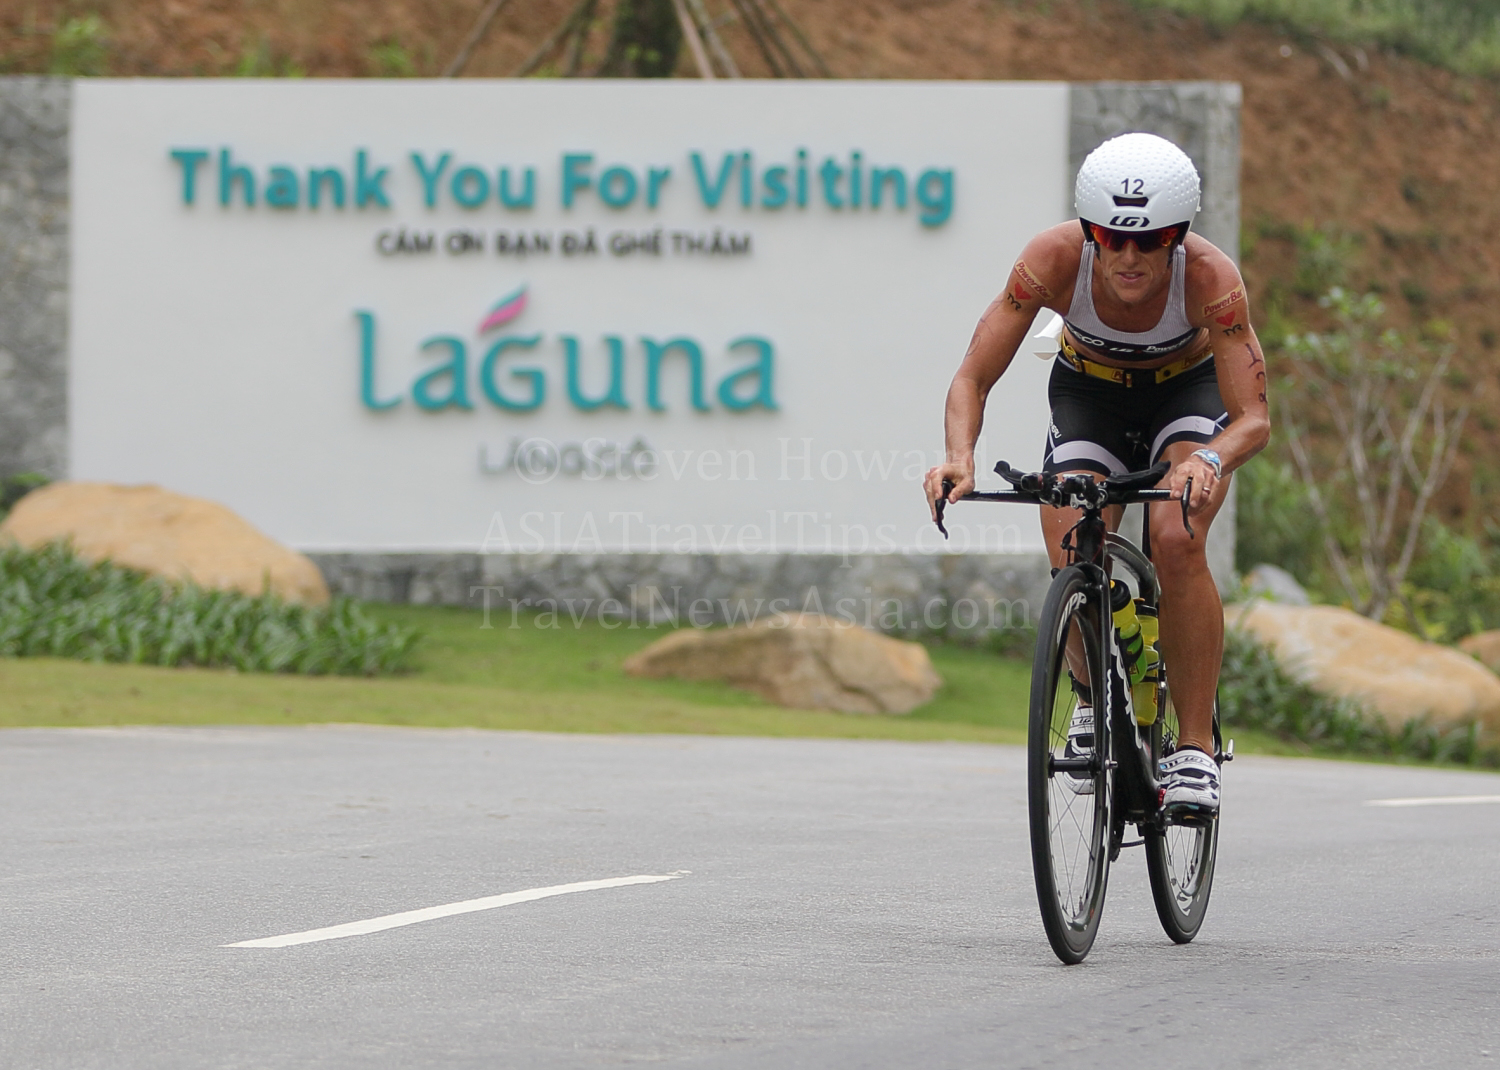 Participant competing in the Laguna Lăng Cô Vietnam Airlines Triathlon 2013. Picture by Steven Howard of TravelNewsAsia.com Click to enlarge.